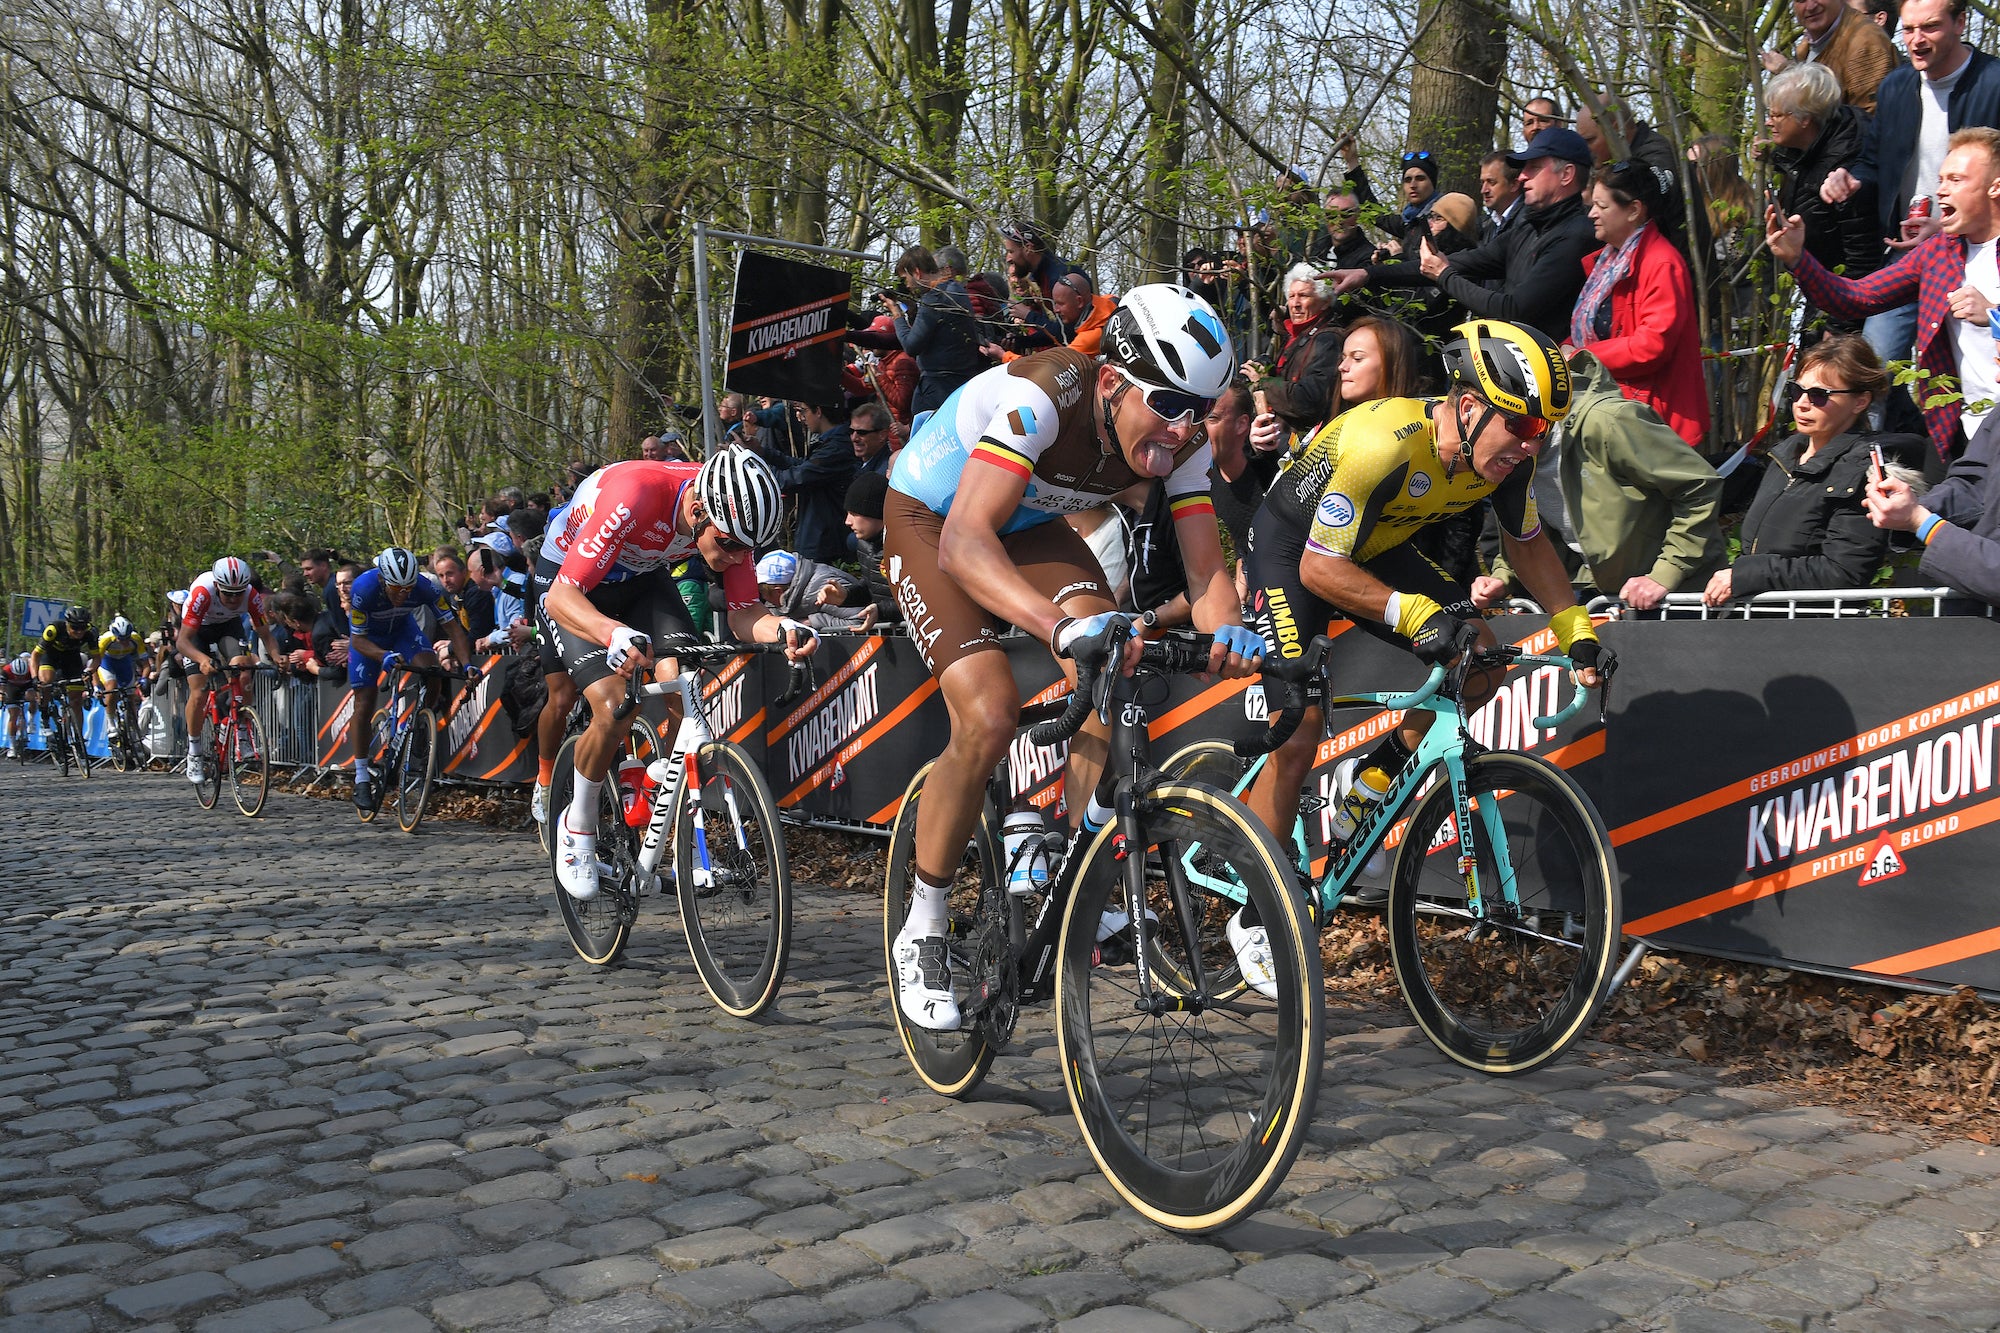 Gent-Wevelgem Wout van Aert and Mathieu van der Poel to clash in opening cobbled classic